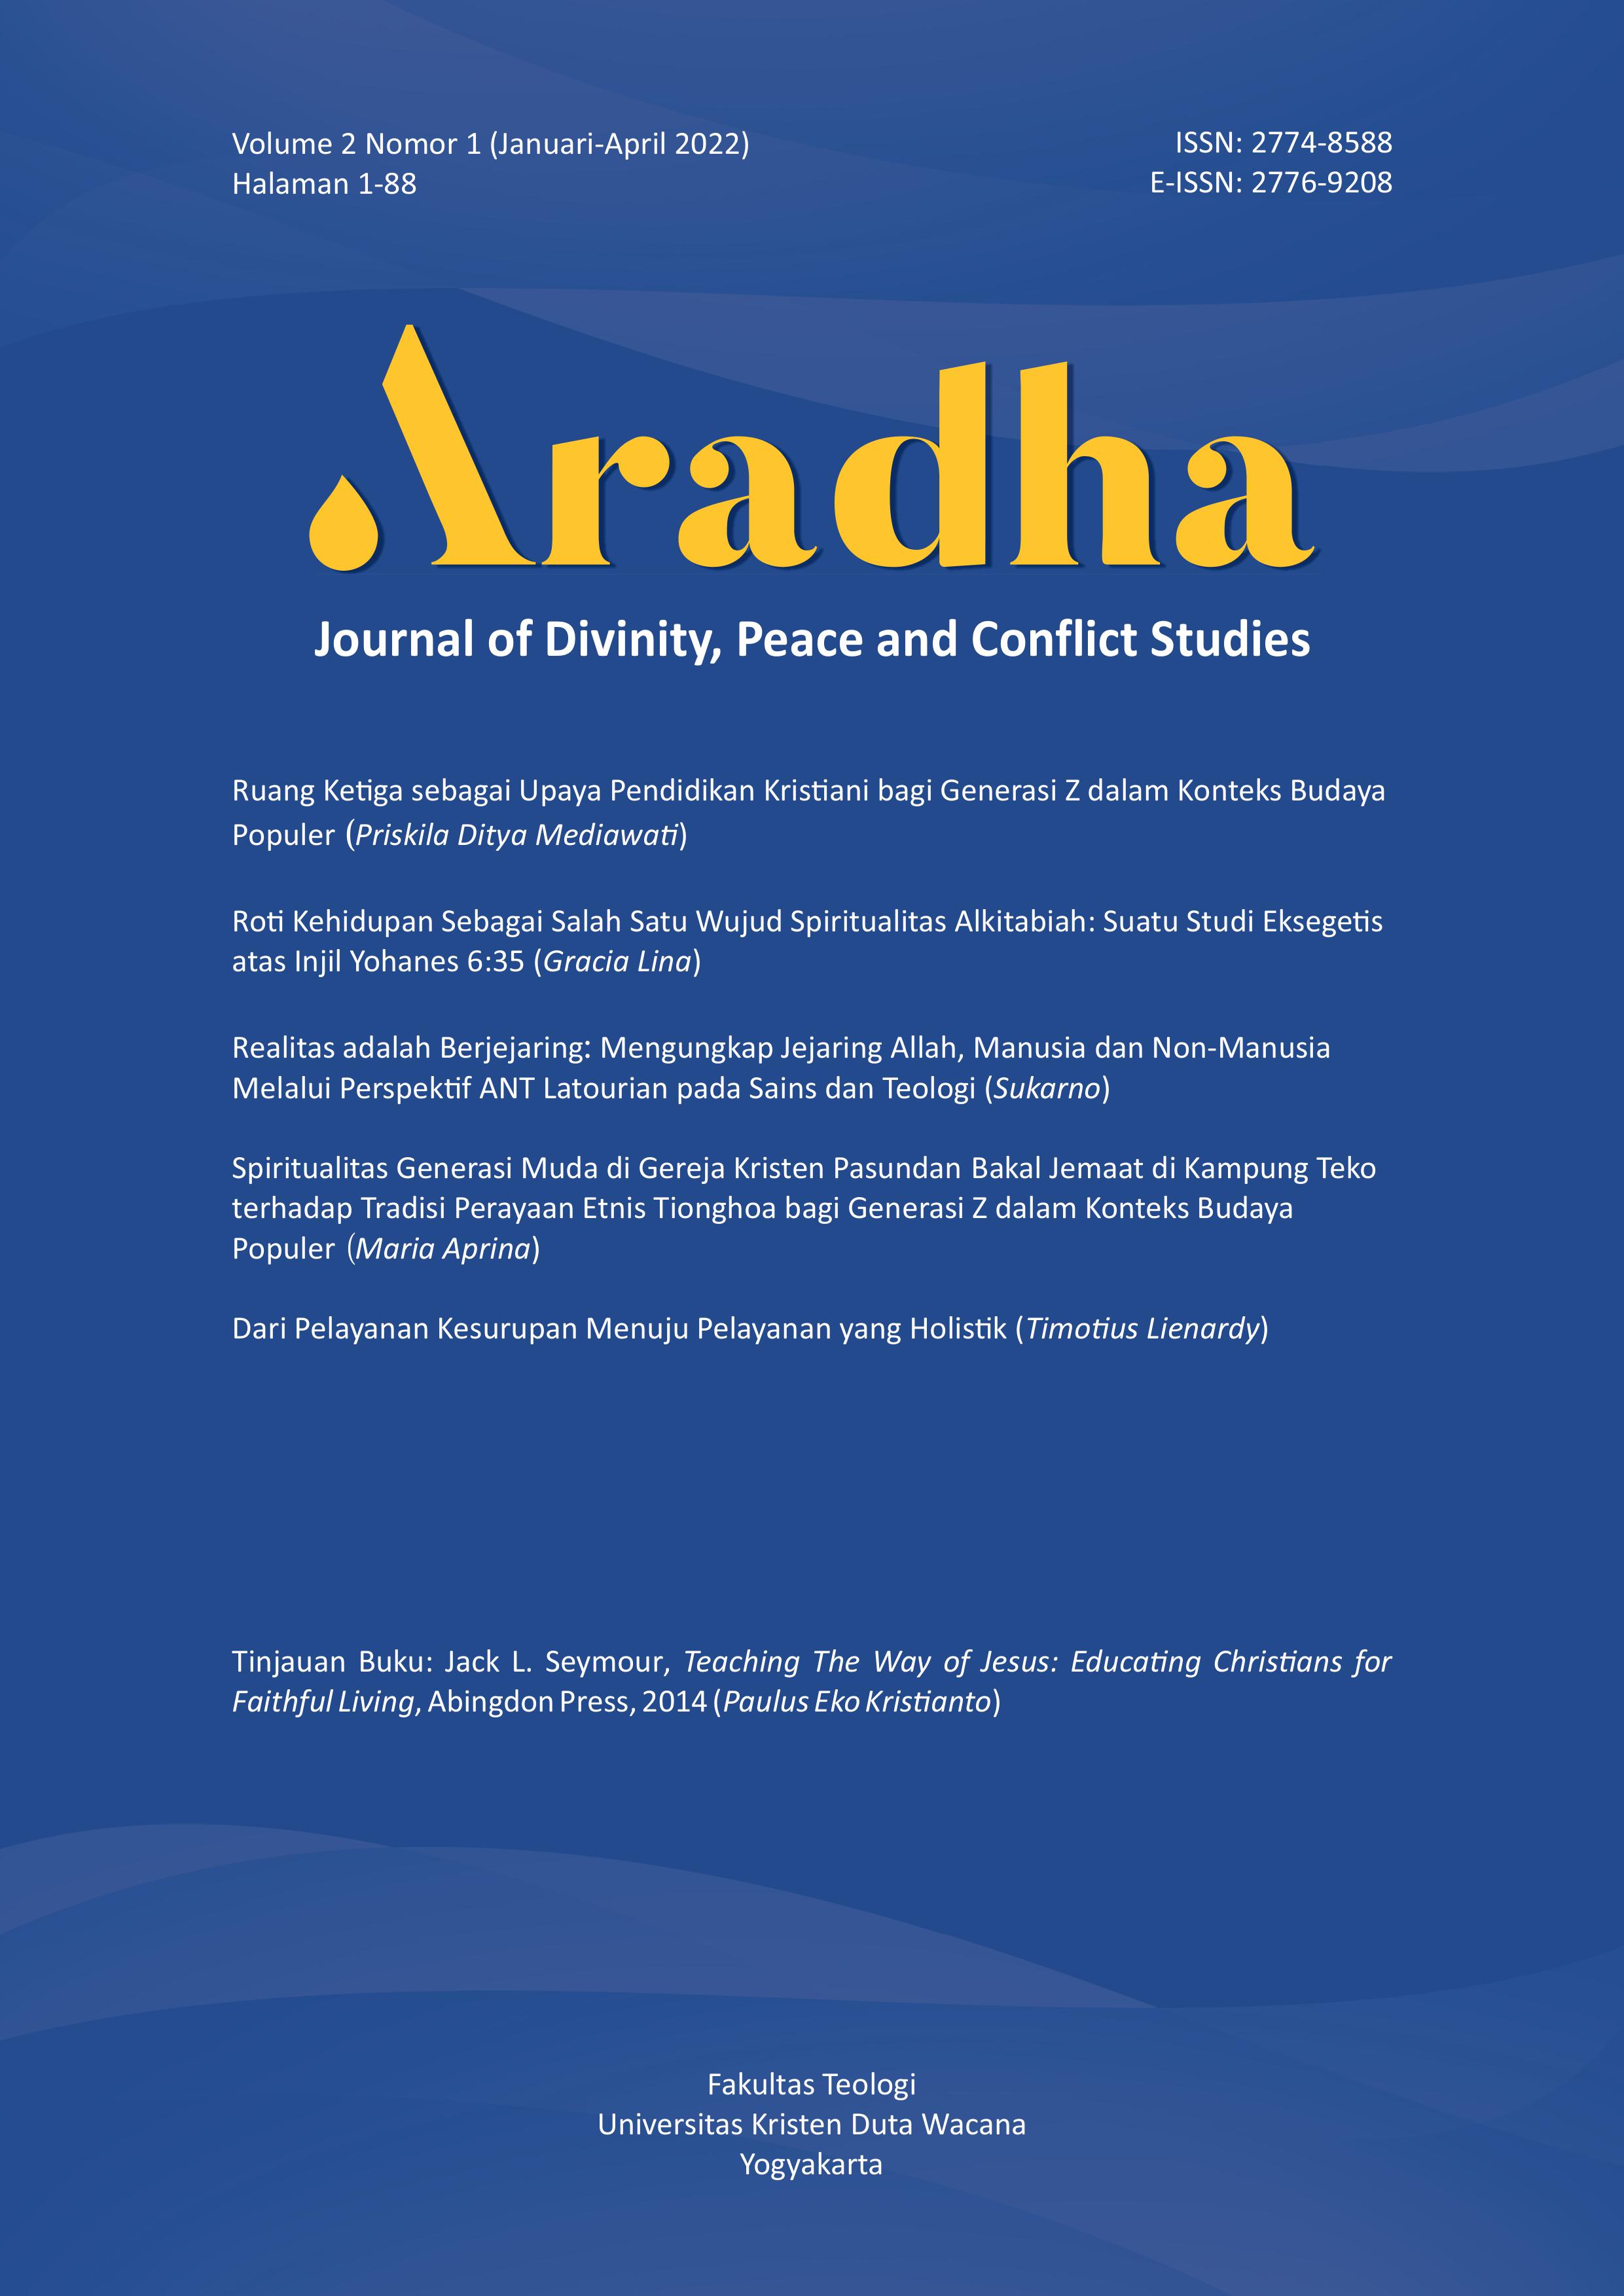 					View Vol. 2 No. 1 (2022): Aradha: Journal of Divinity, Peace, and Conflict Studies
				